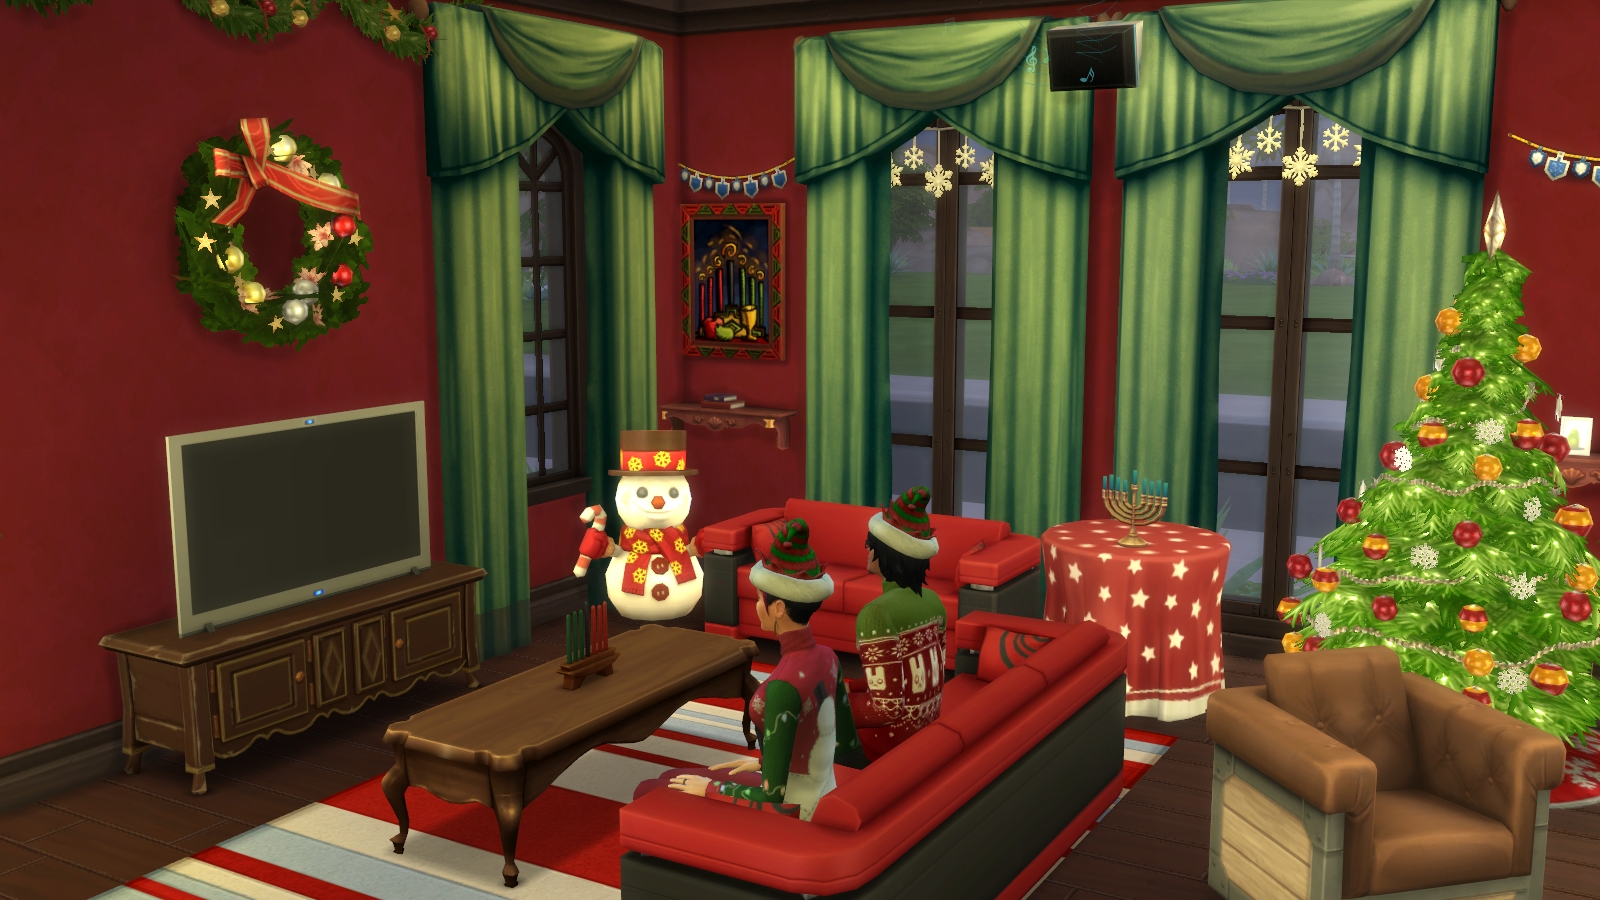 The Sims 4 Holiday Celebration Pack Object List